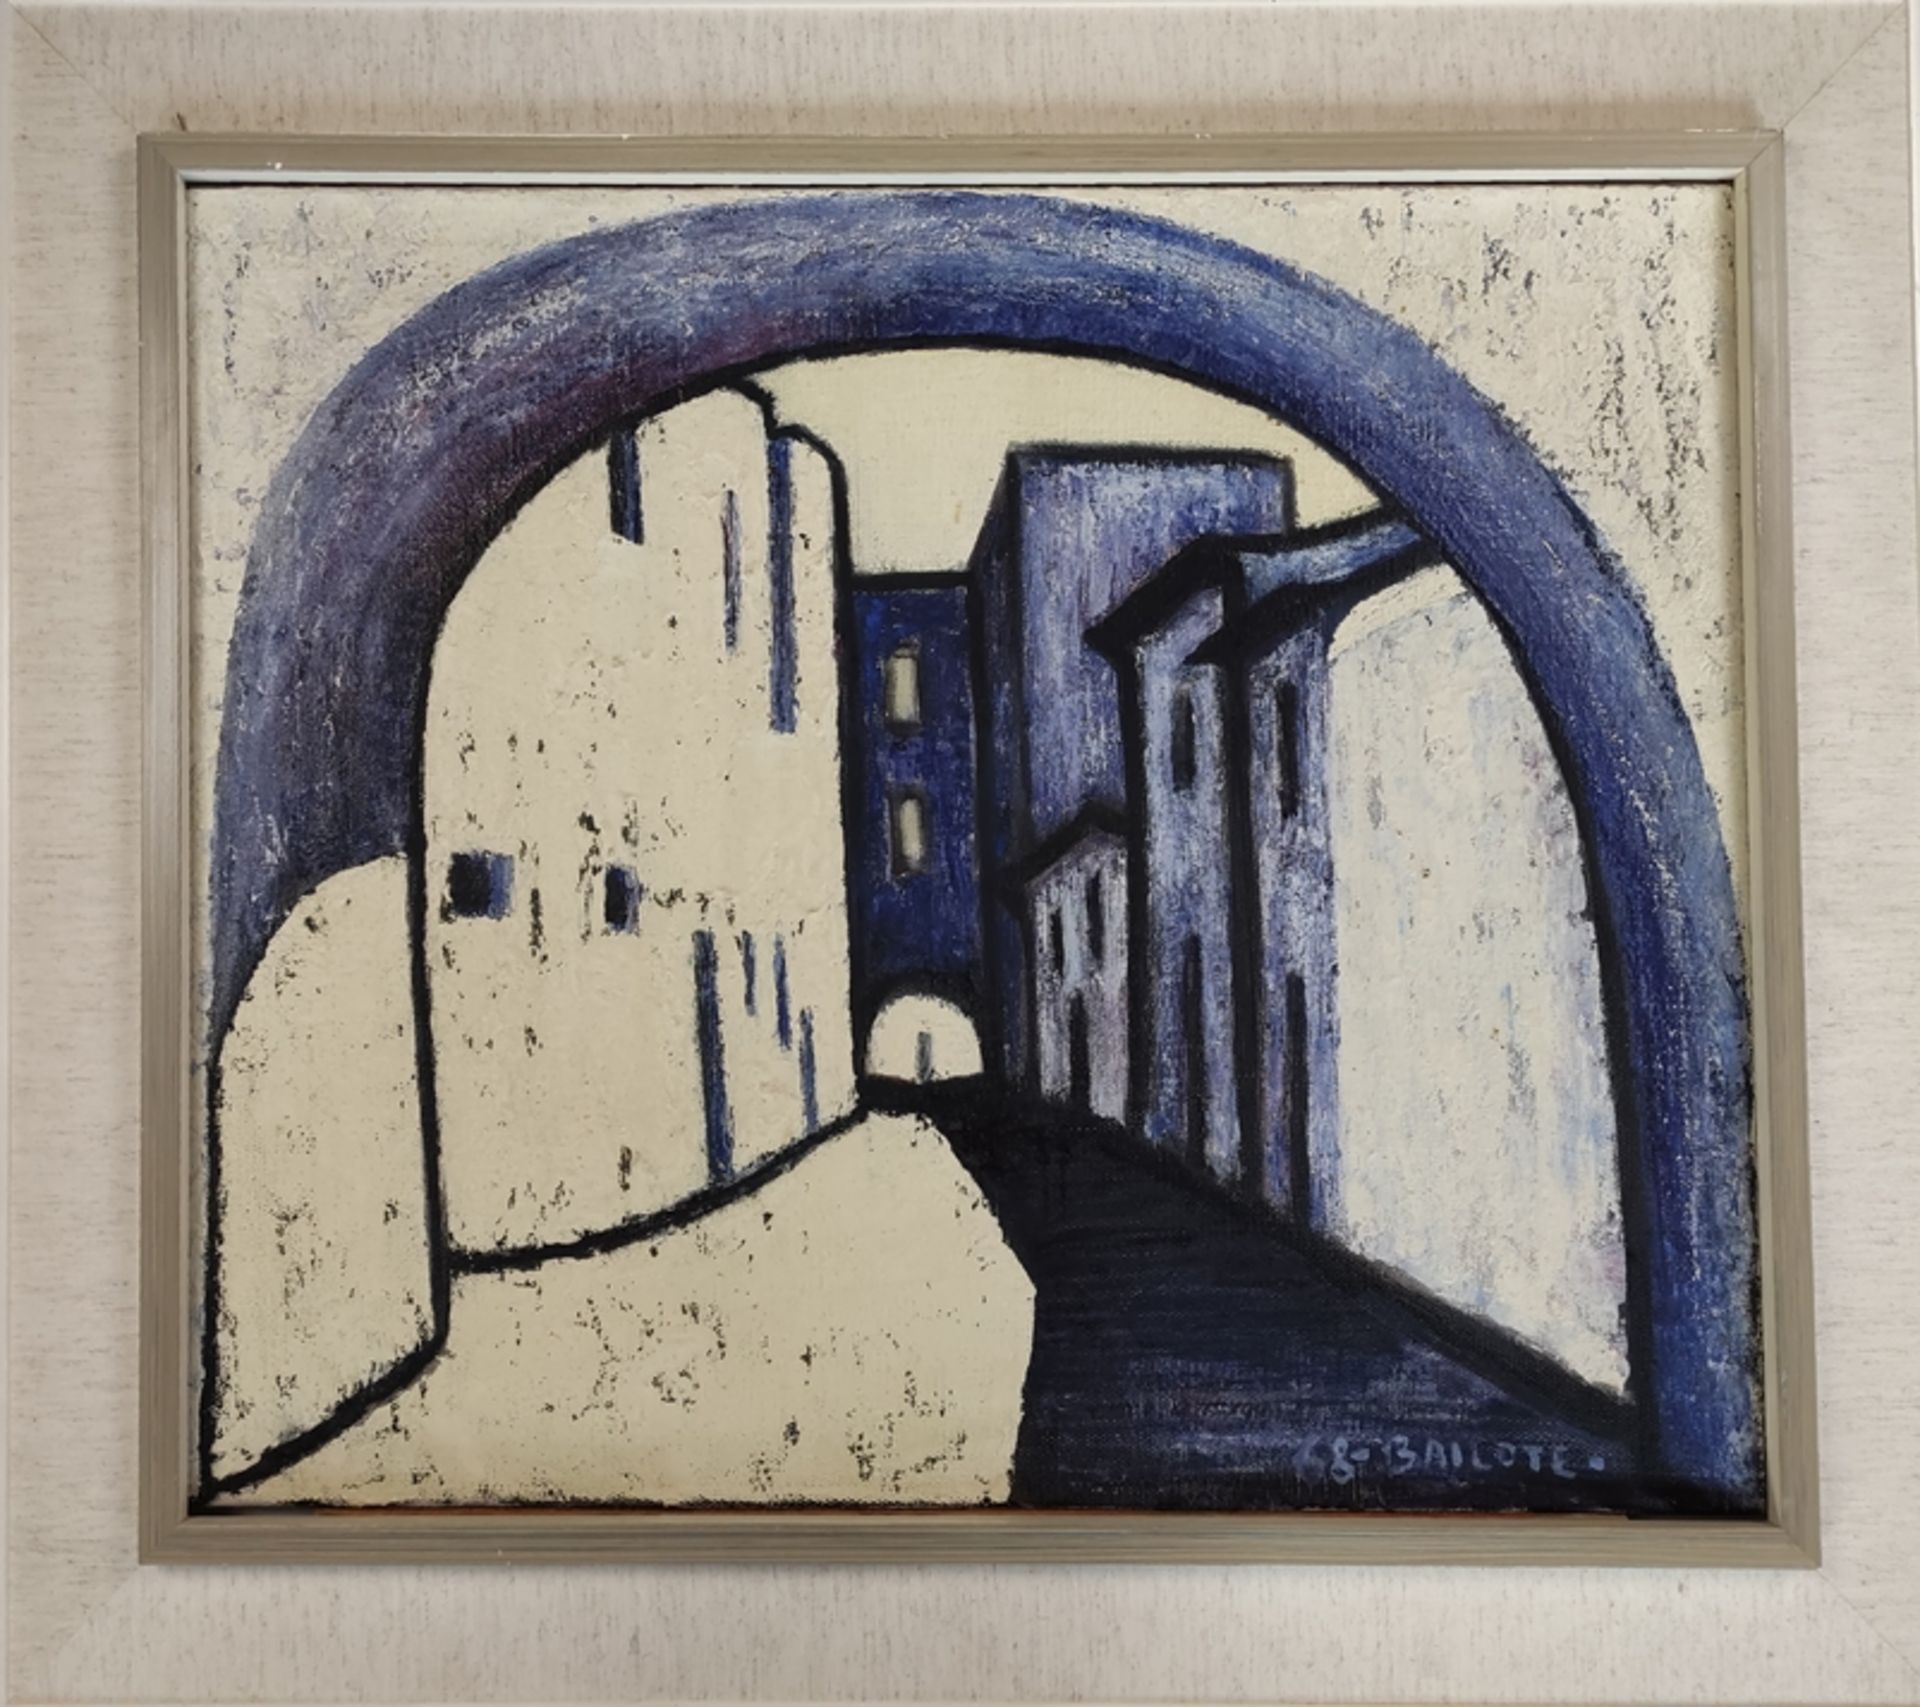 Bailote, Joao Barreto (1913 - 1986 Portugal) "Untitled", view through a round arch onto facades, si - Image 2 of 4